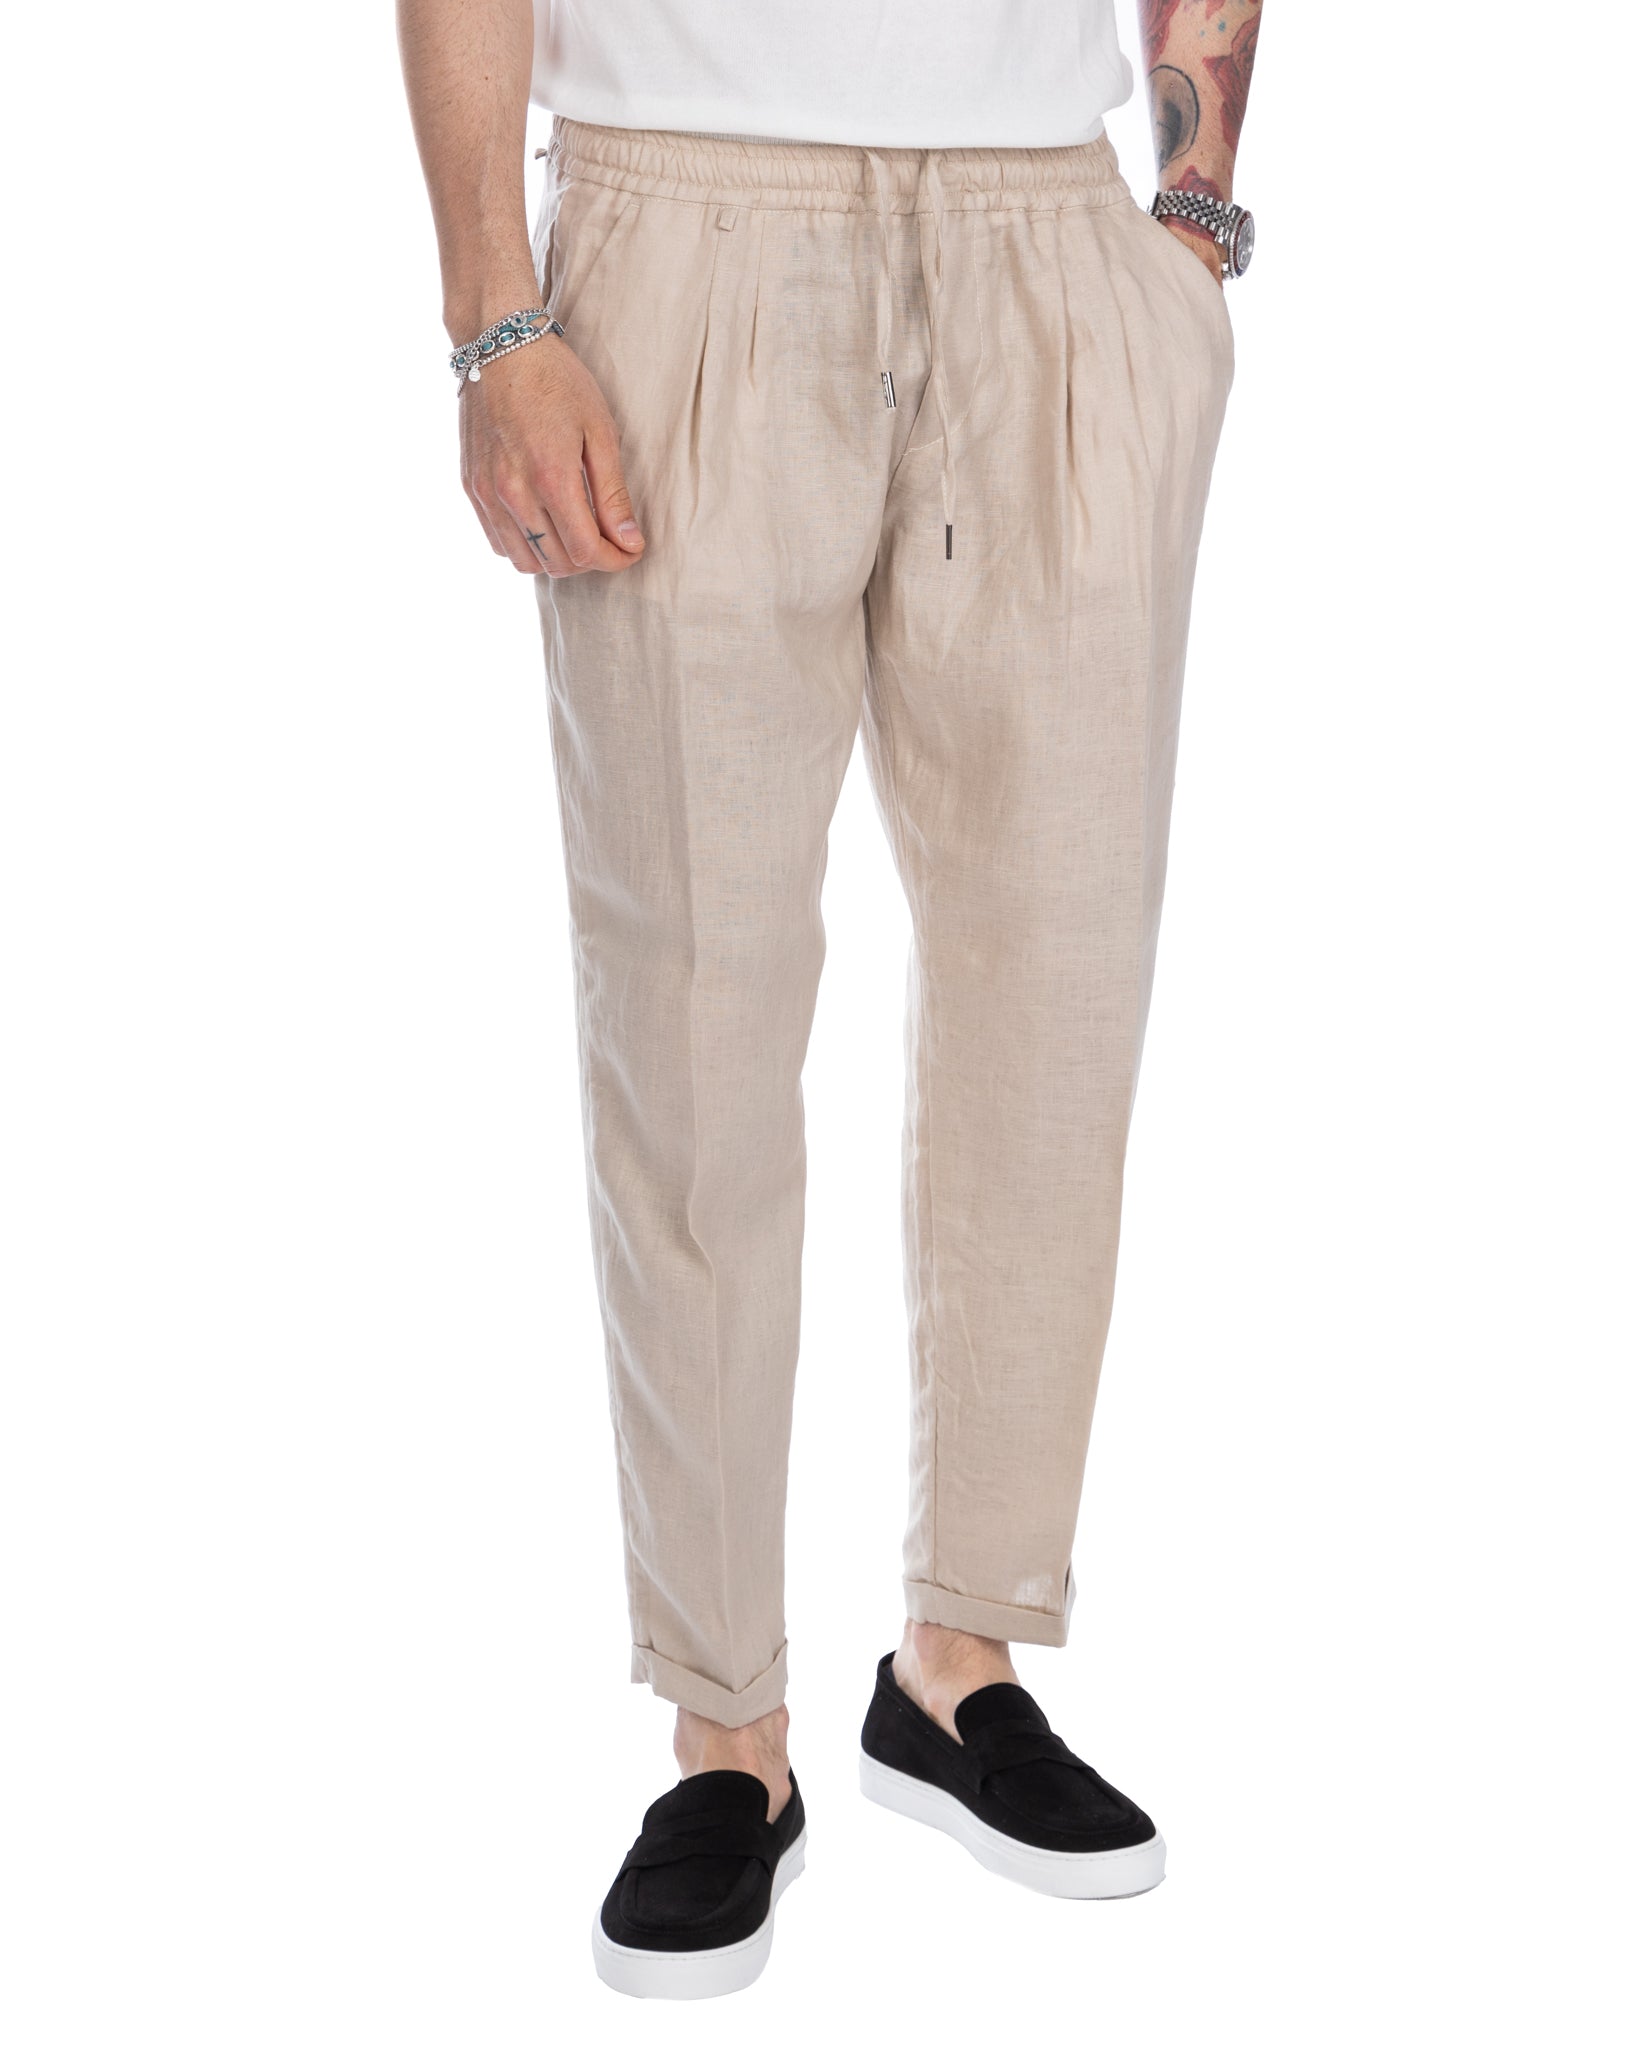 Colin - pure linen twine trousers